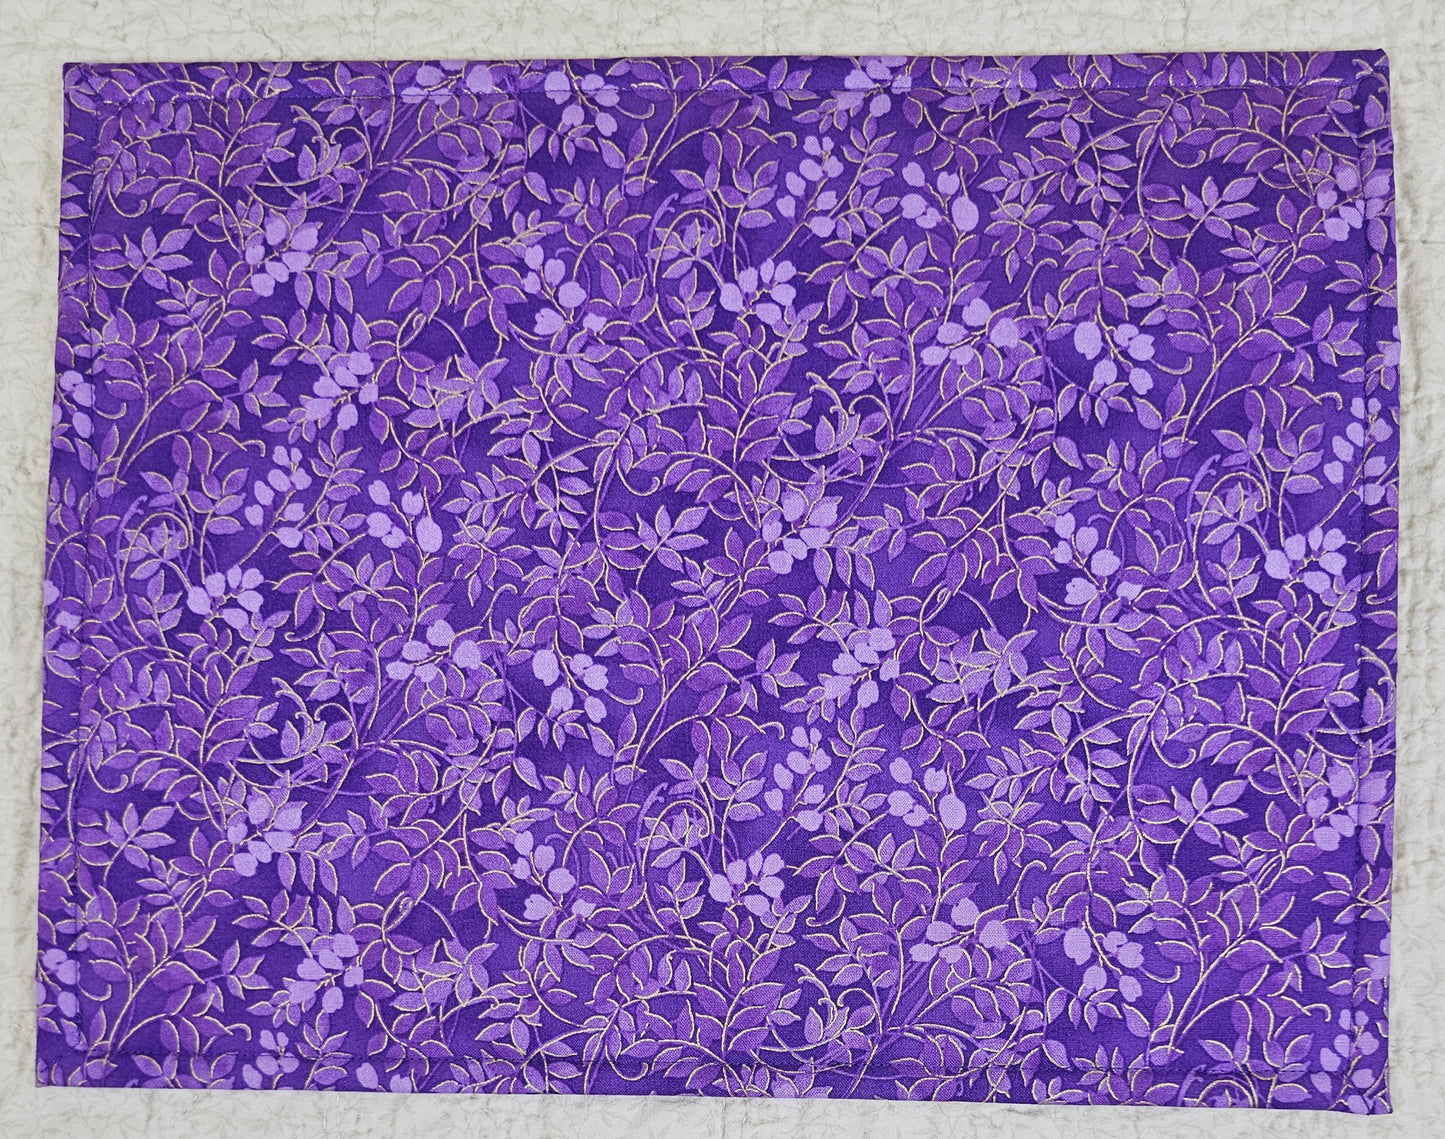 Blue & Purple Paisley and Flowers - with blue trim, purple zipper and back -  11" x 14" Project Bag